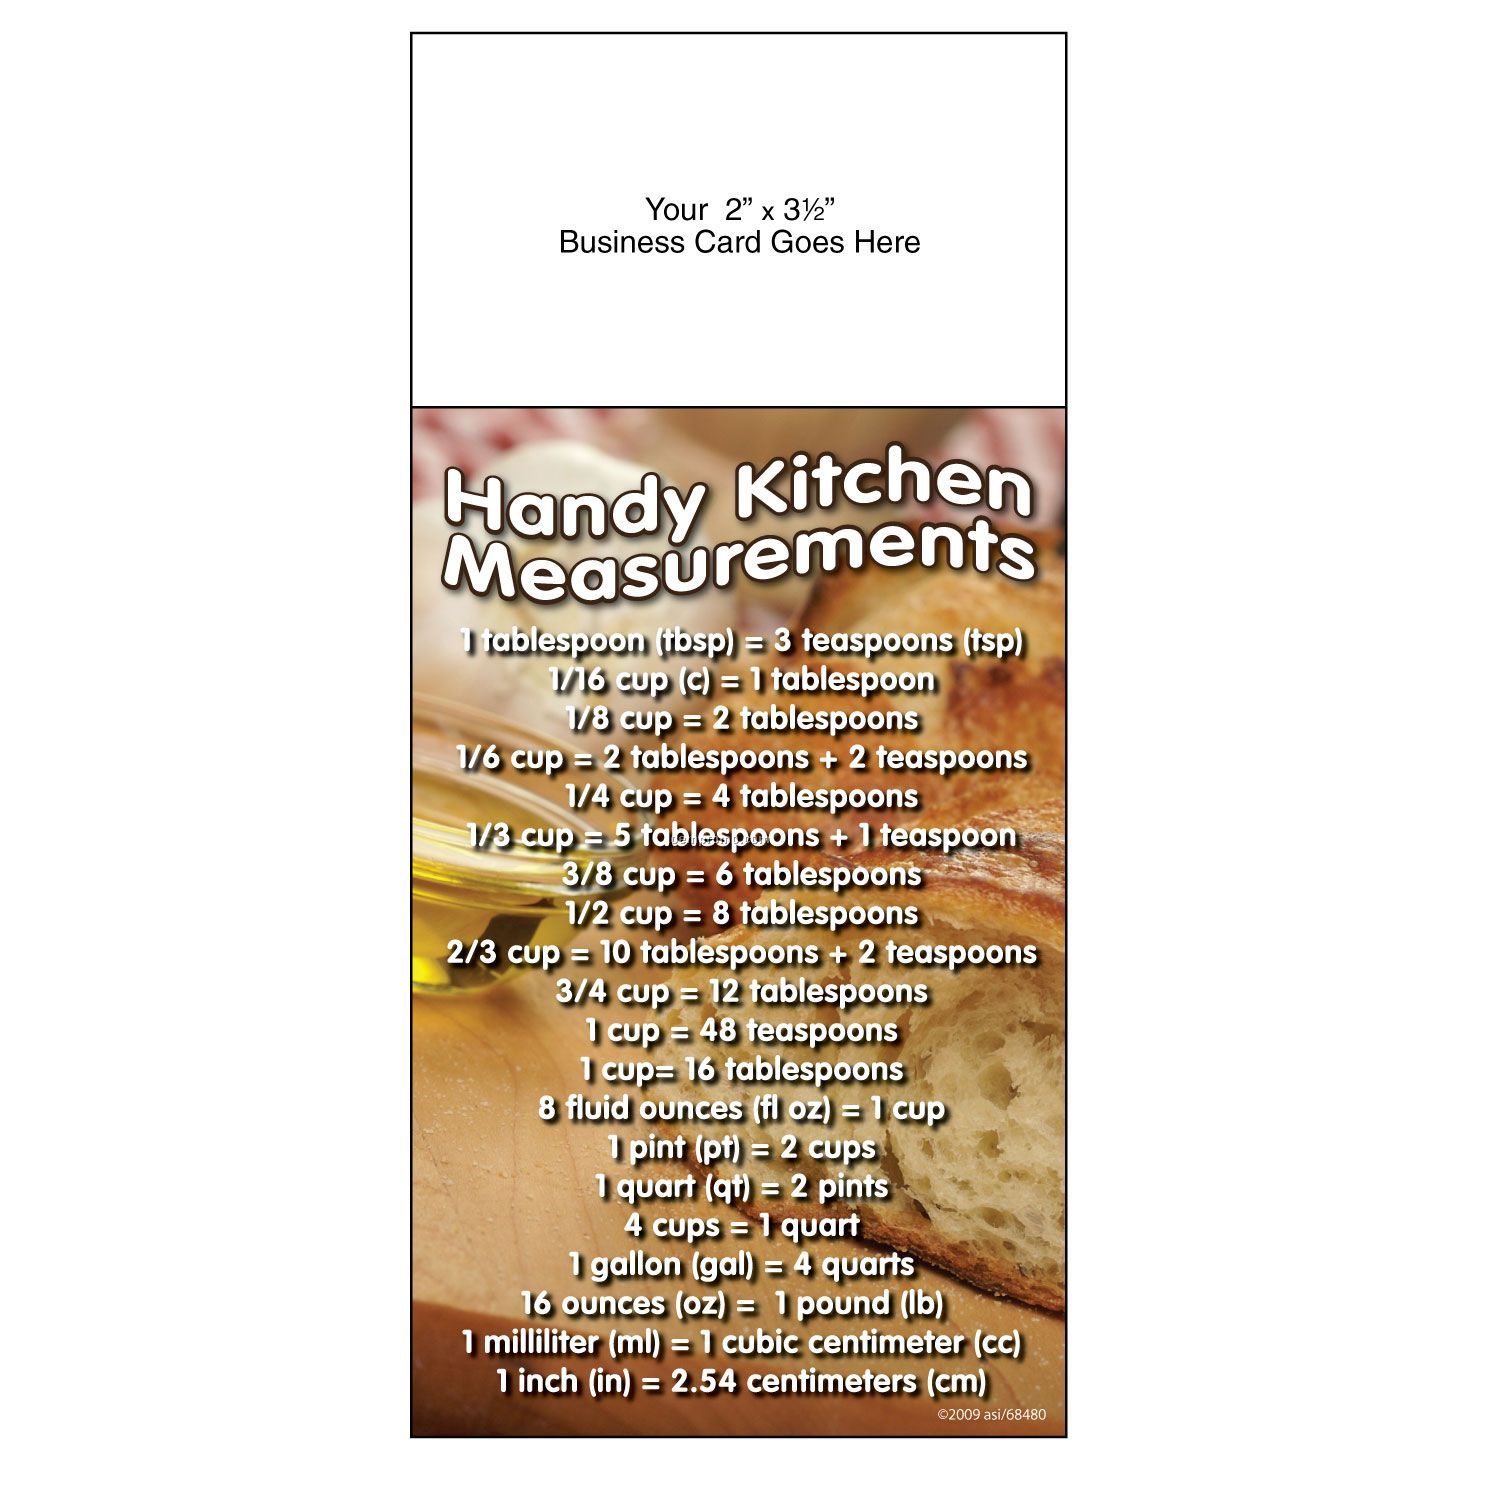 Self-adhesive Add-on Magnet + Info Card "Handy Kitchen Measurements"